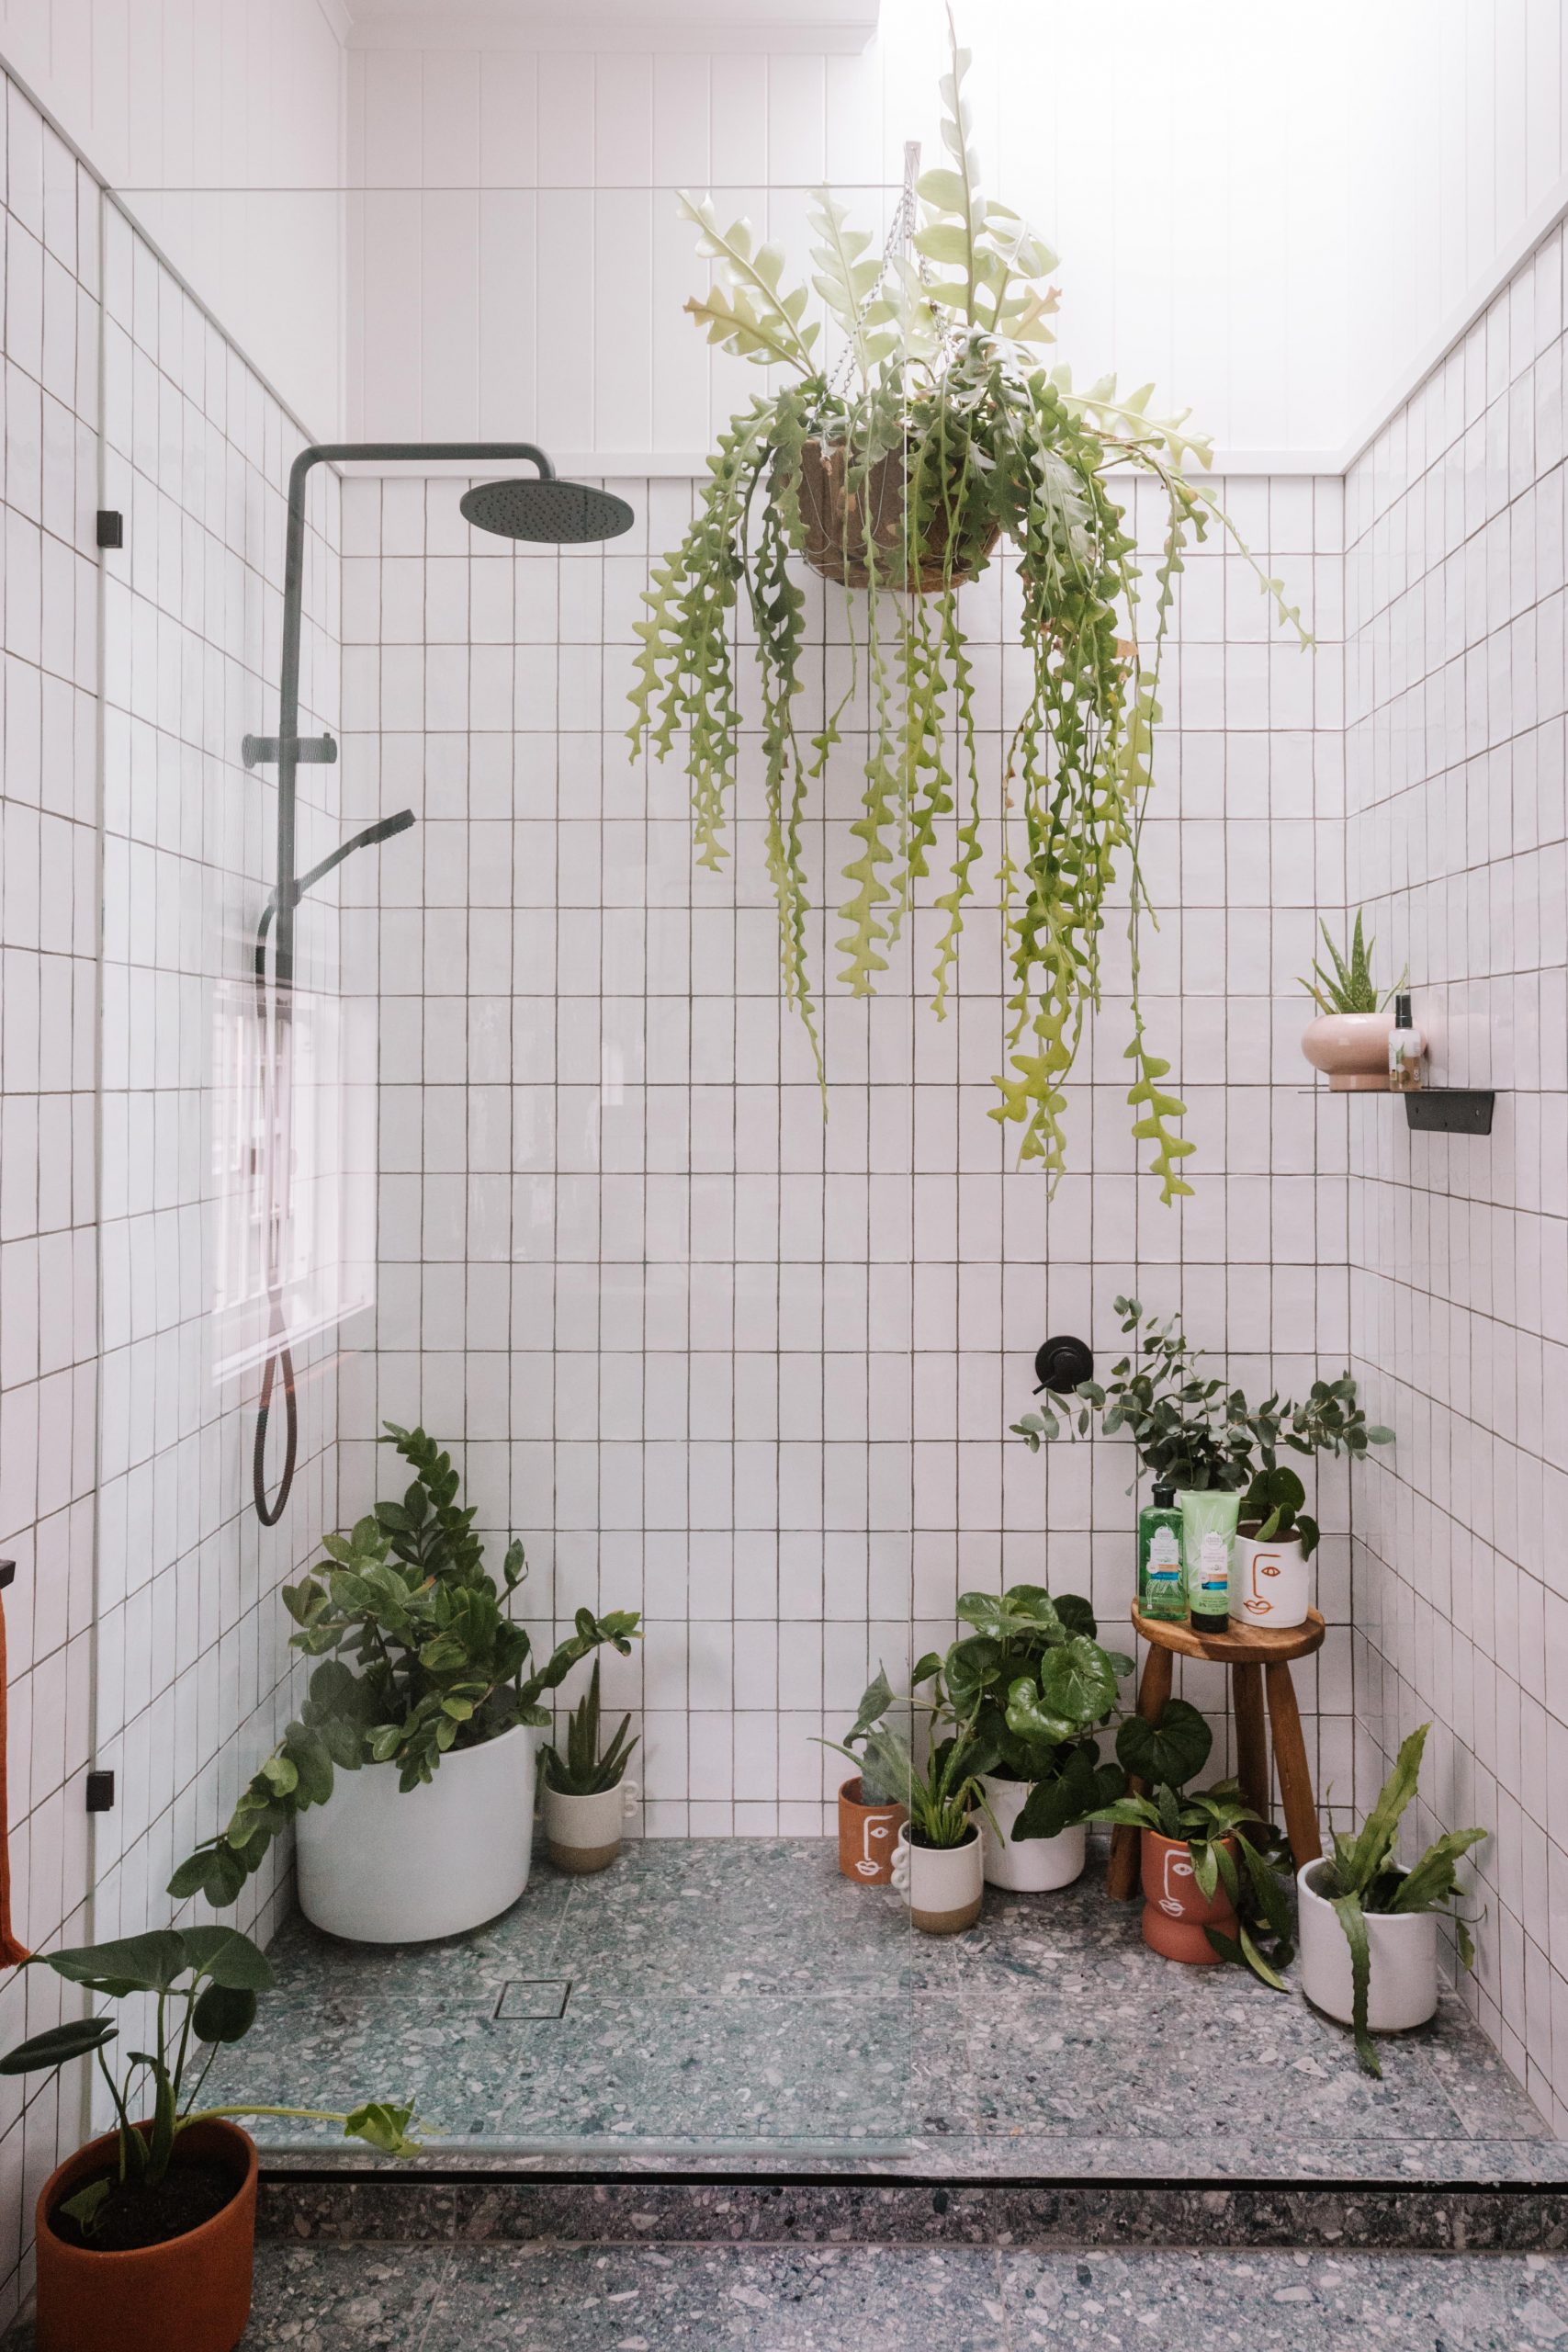 Turn the spare bathroom into an oasis filled with plants!